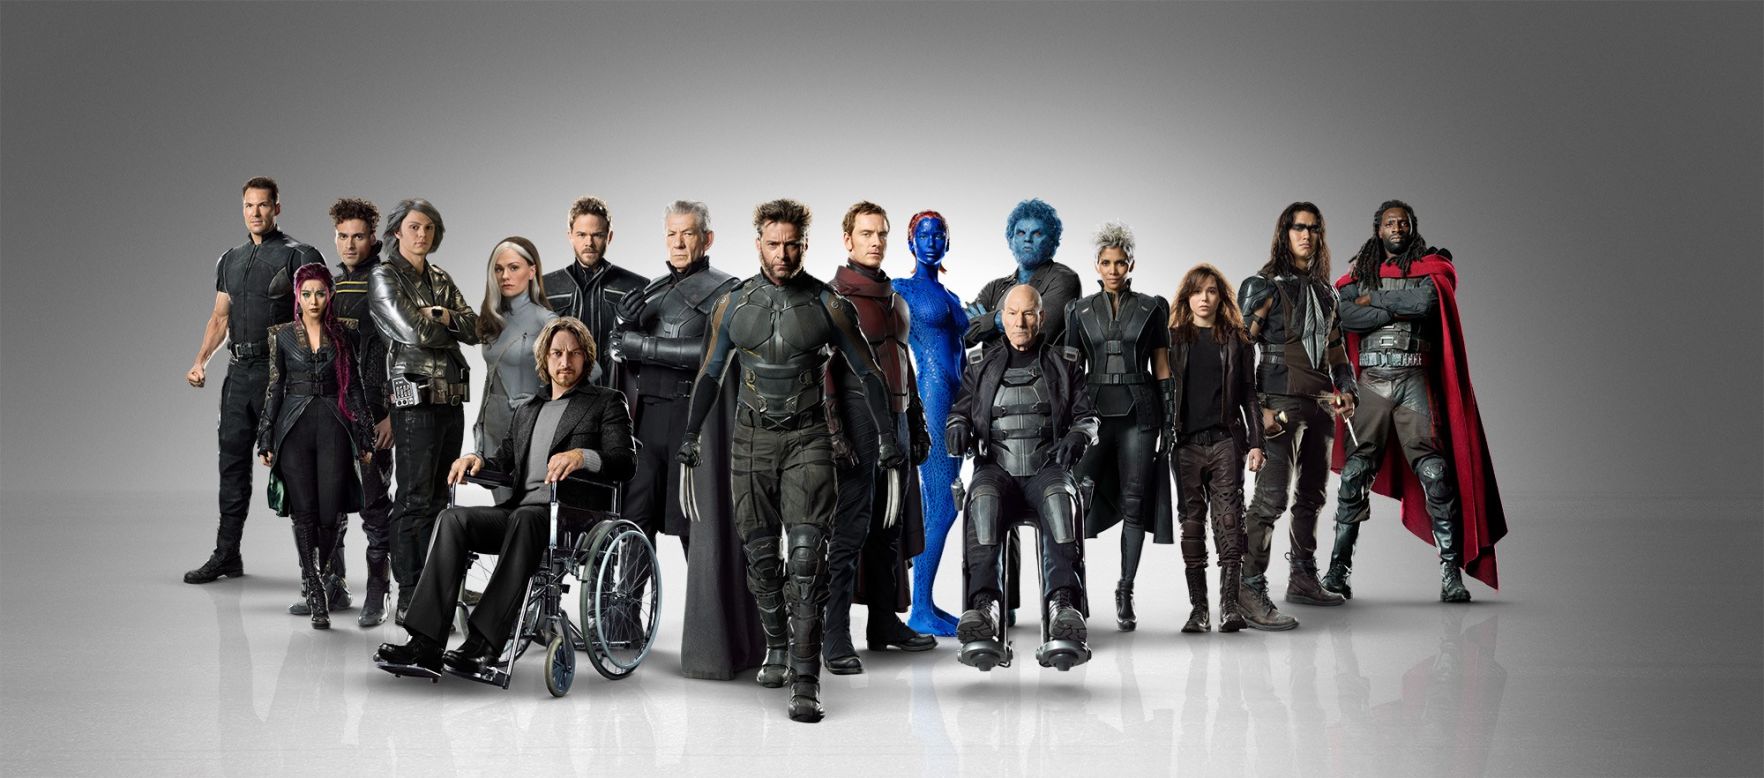 Meet the 'X-Men:' From page to screen in 'Days of Future Past